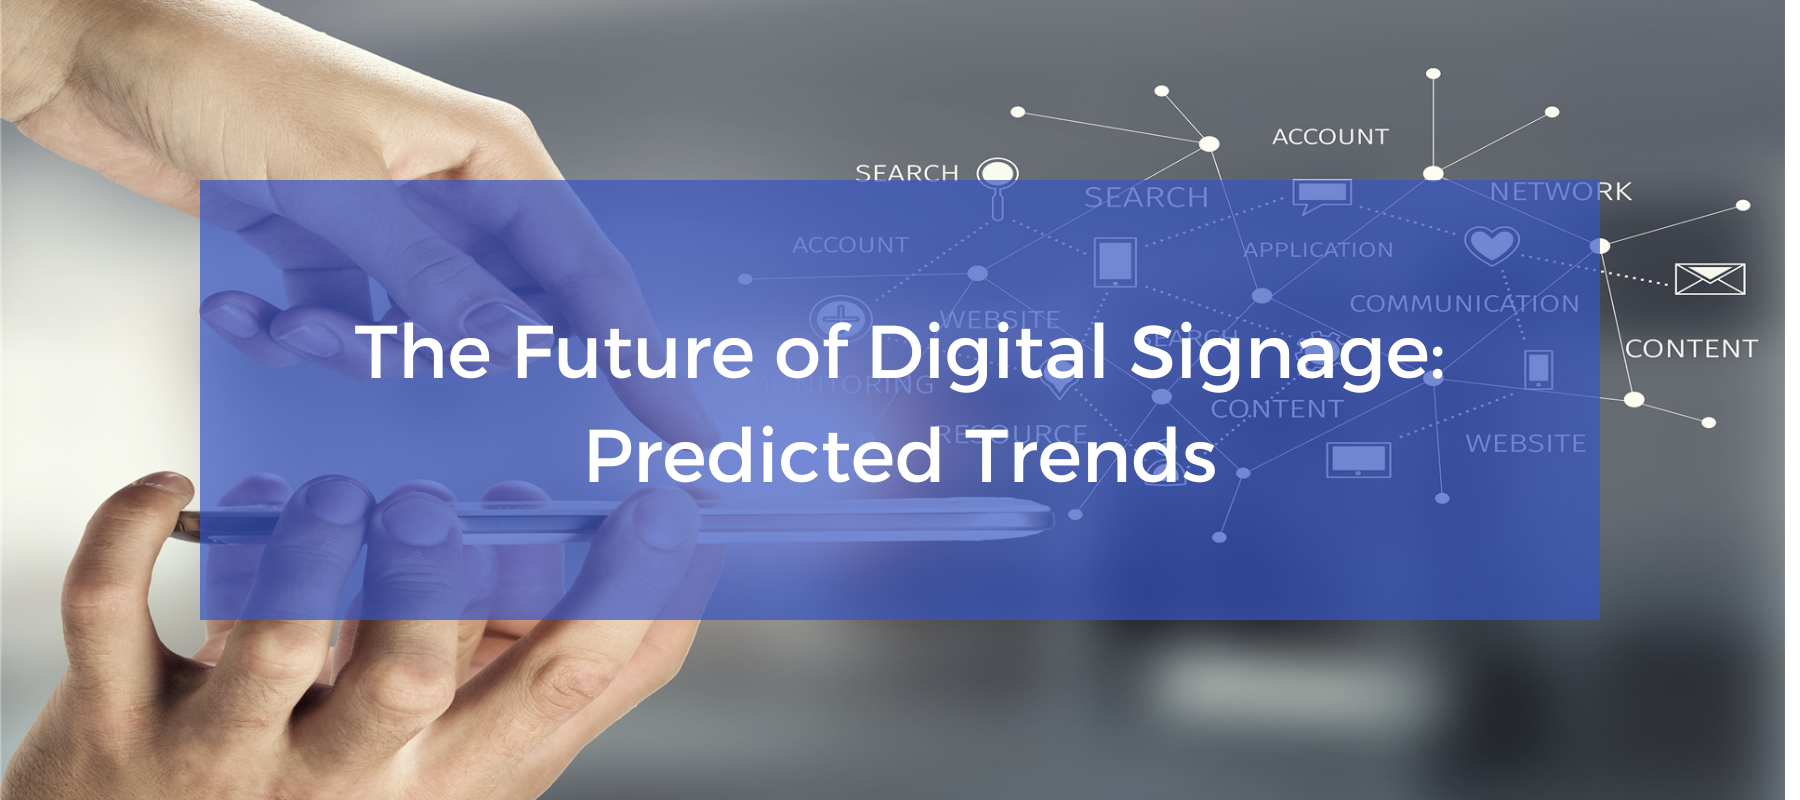 The Future of Digital Signage Predicted Trends